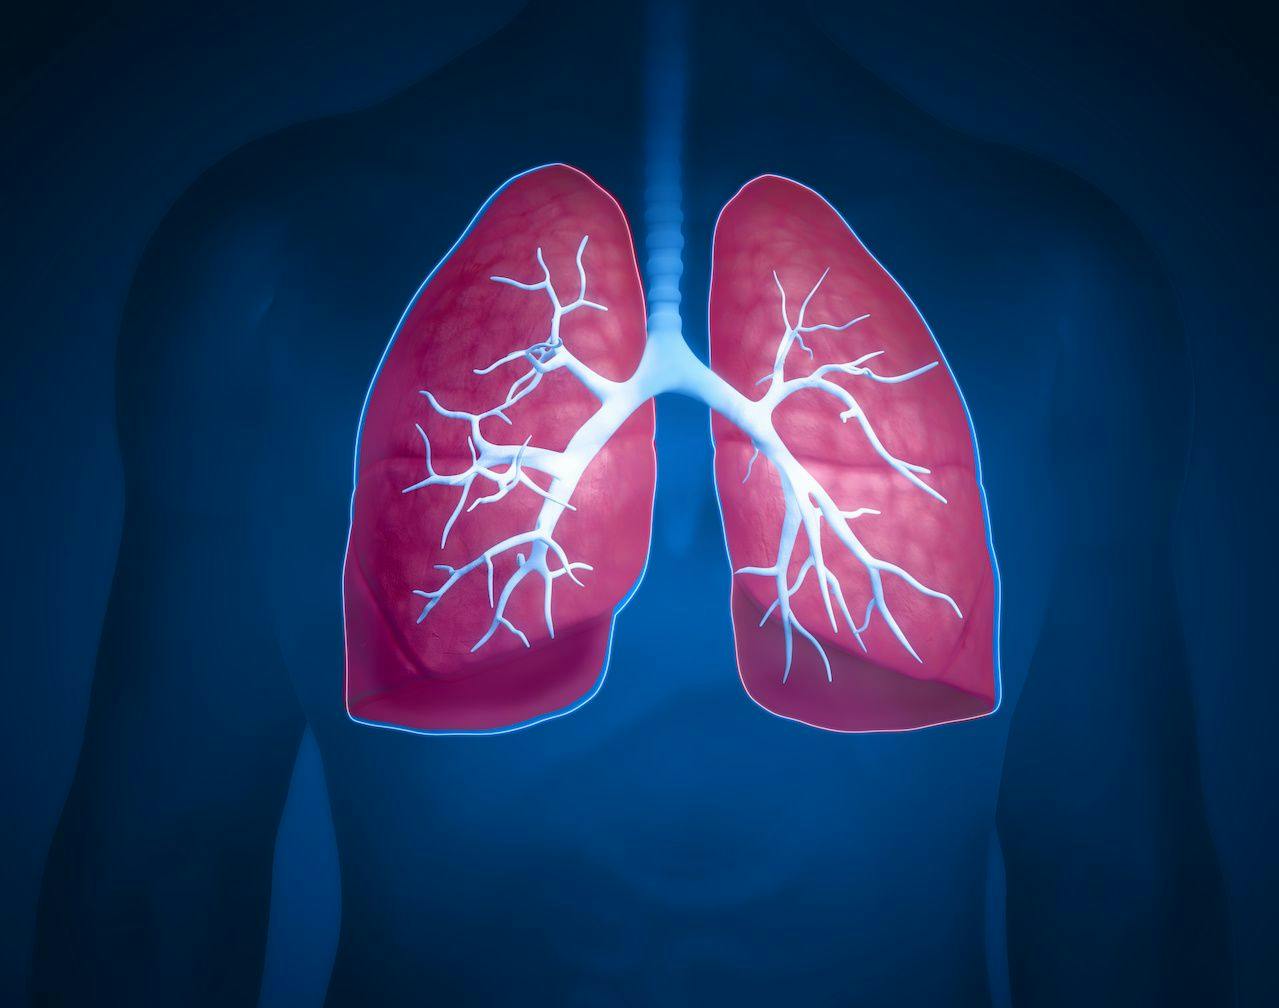 Cystic Fibrosis Further Explained by Rare Cell Type Discovery